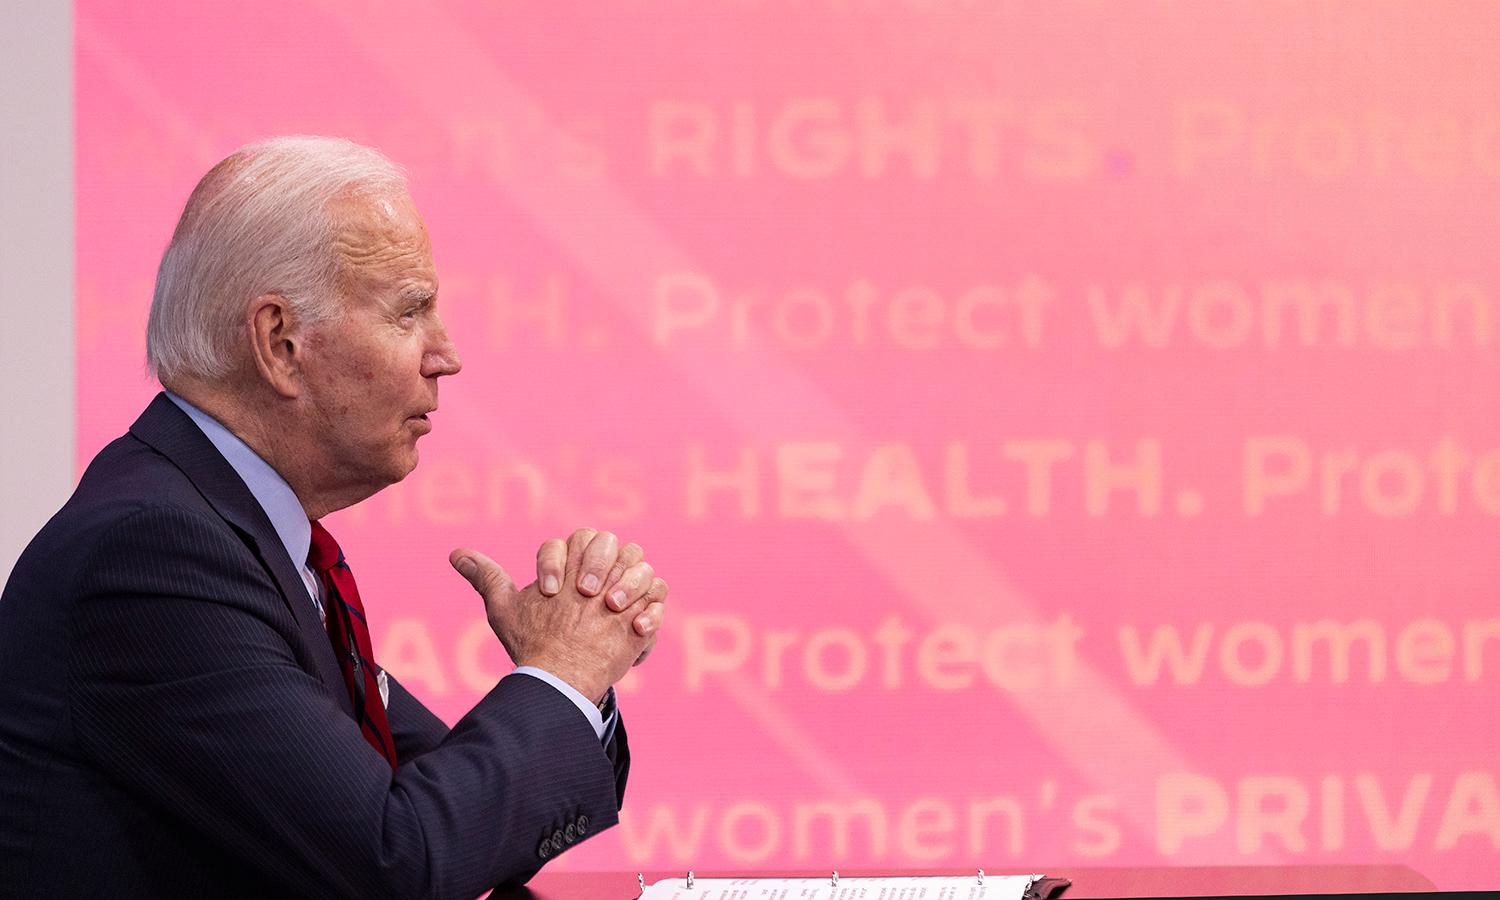 President Joe Biden speaks with governors on protecting access to reproductive healthcare at the White House on July 1 in Washington. Biden signed an executive order Friday to protect access to reproductive healthcare servces. (Photo by Tasos Katopodis/Getty Images)